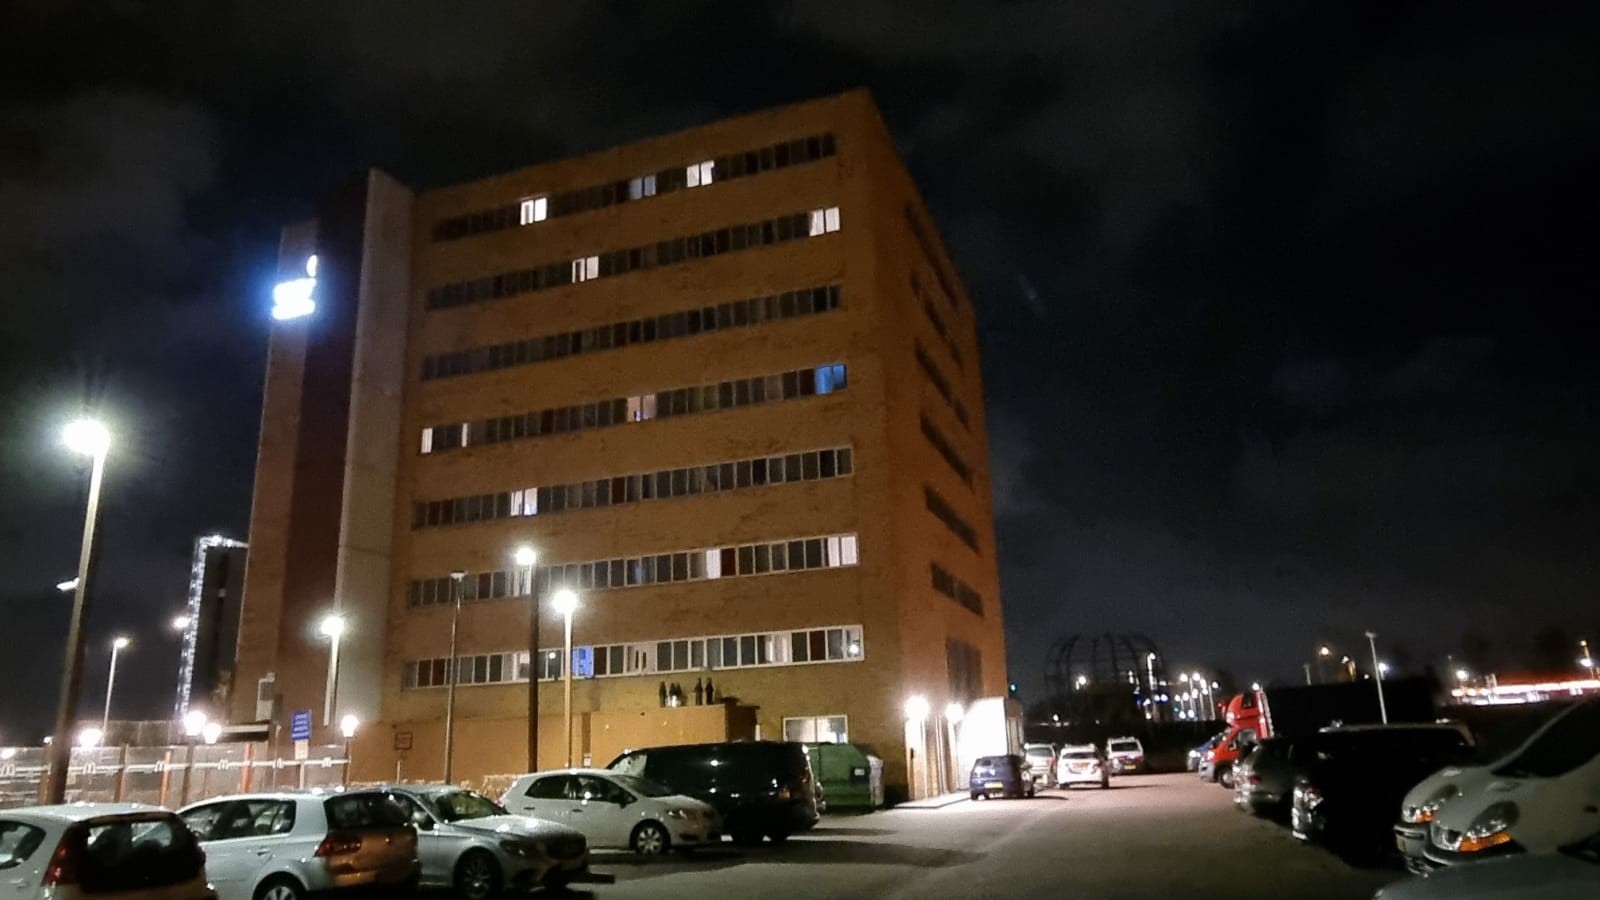 Overval op hotel in Osdorp